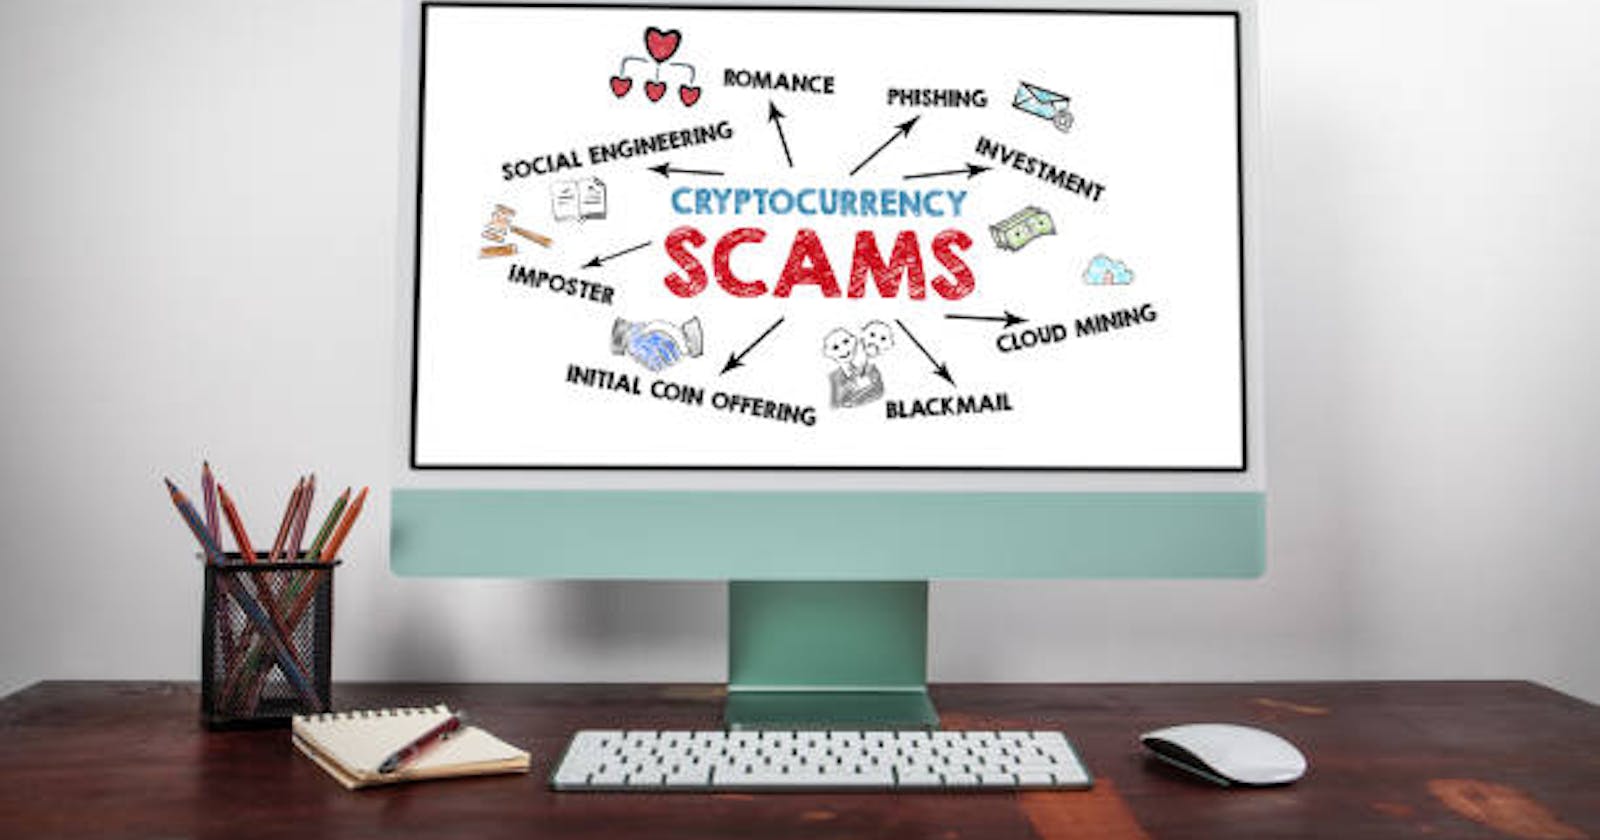 Exposed: The Inside Story of a Ruthless Crypto Scam—Protect Your Investments!